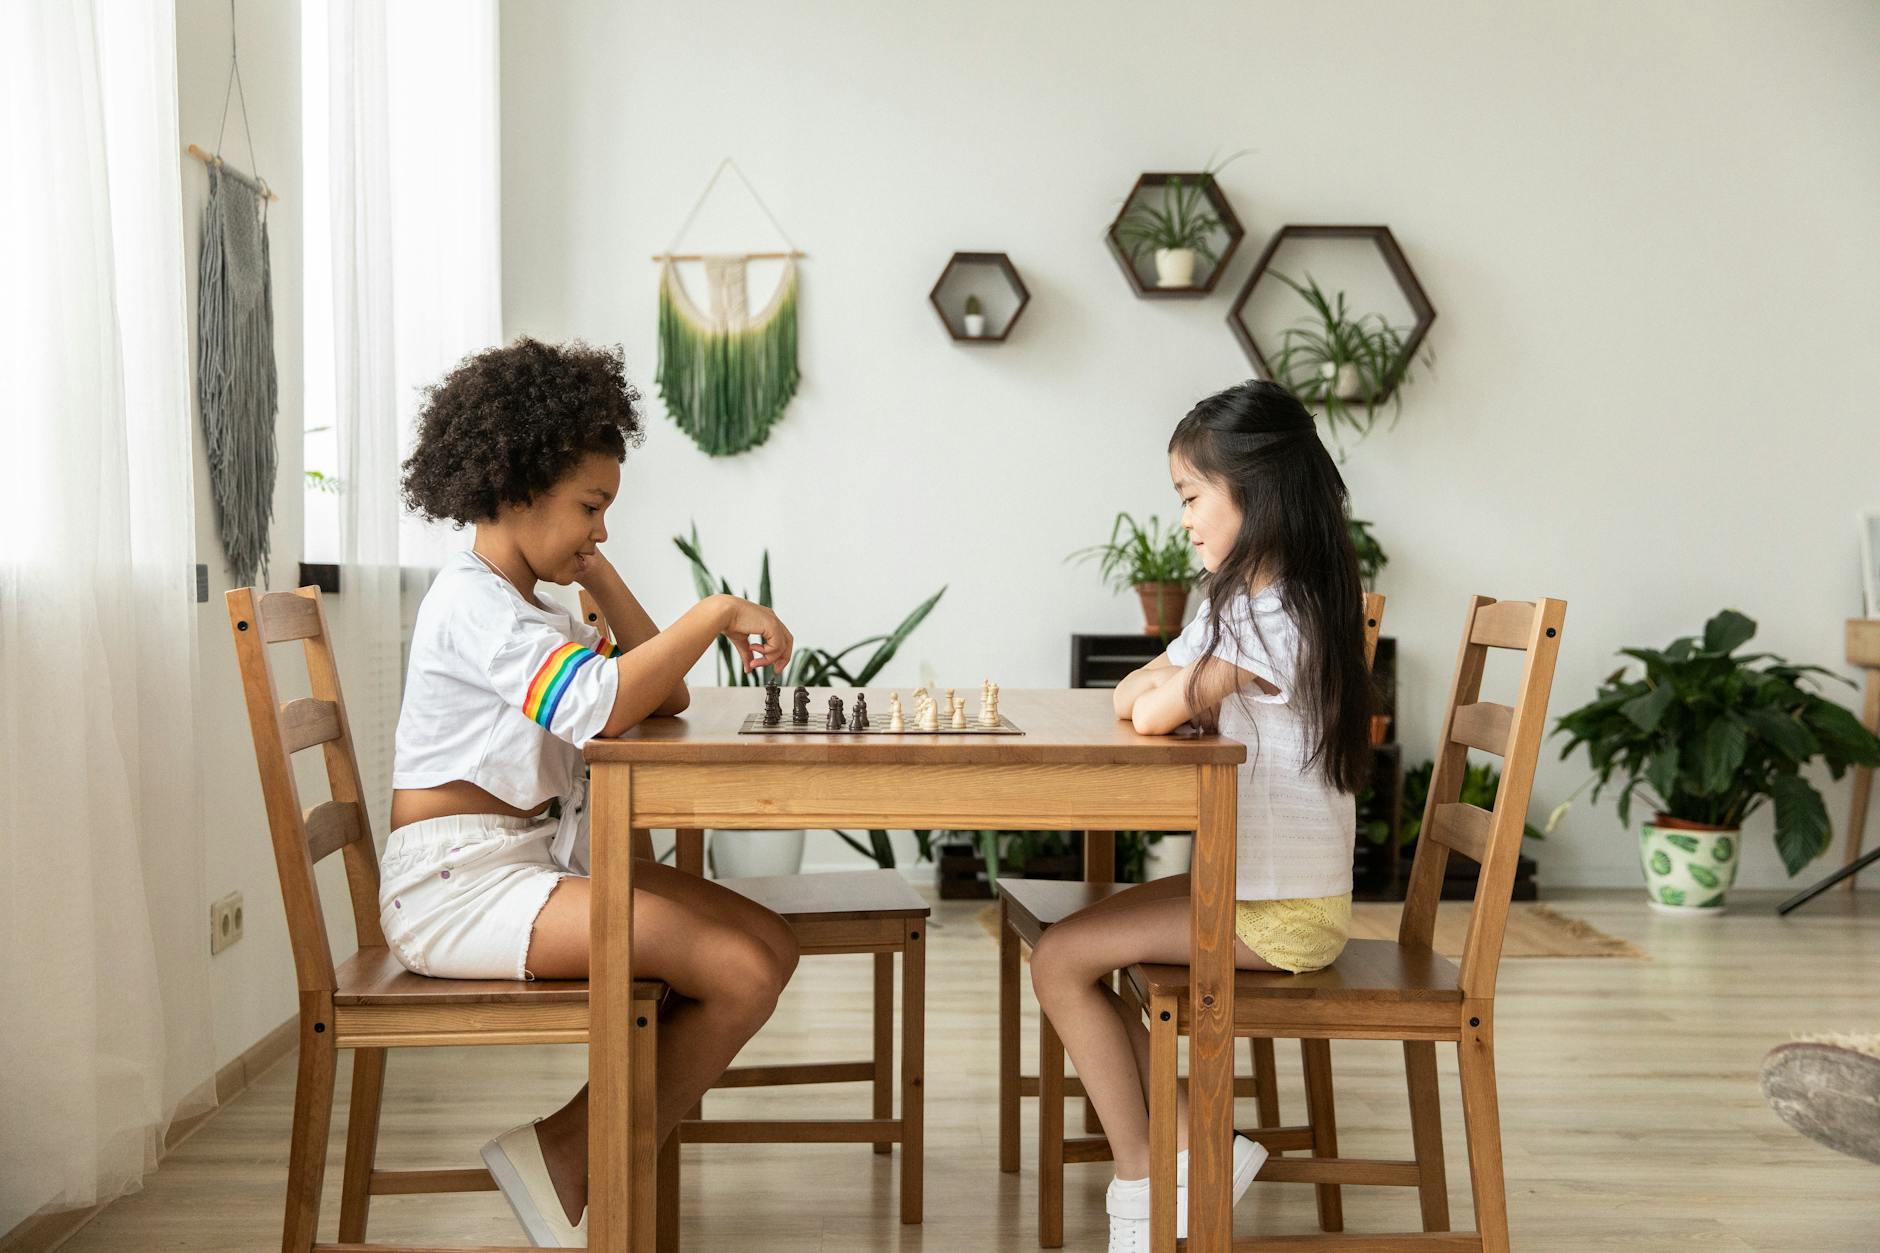 Full body side view of multiethnic girls in casual clothing playing chess at wooden table in bright room decorated with plants in pots